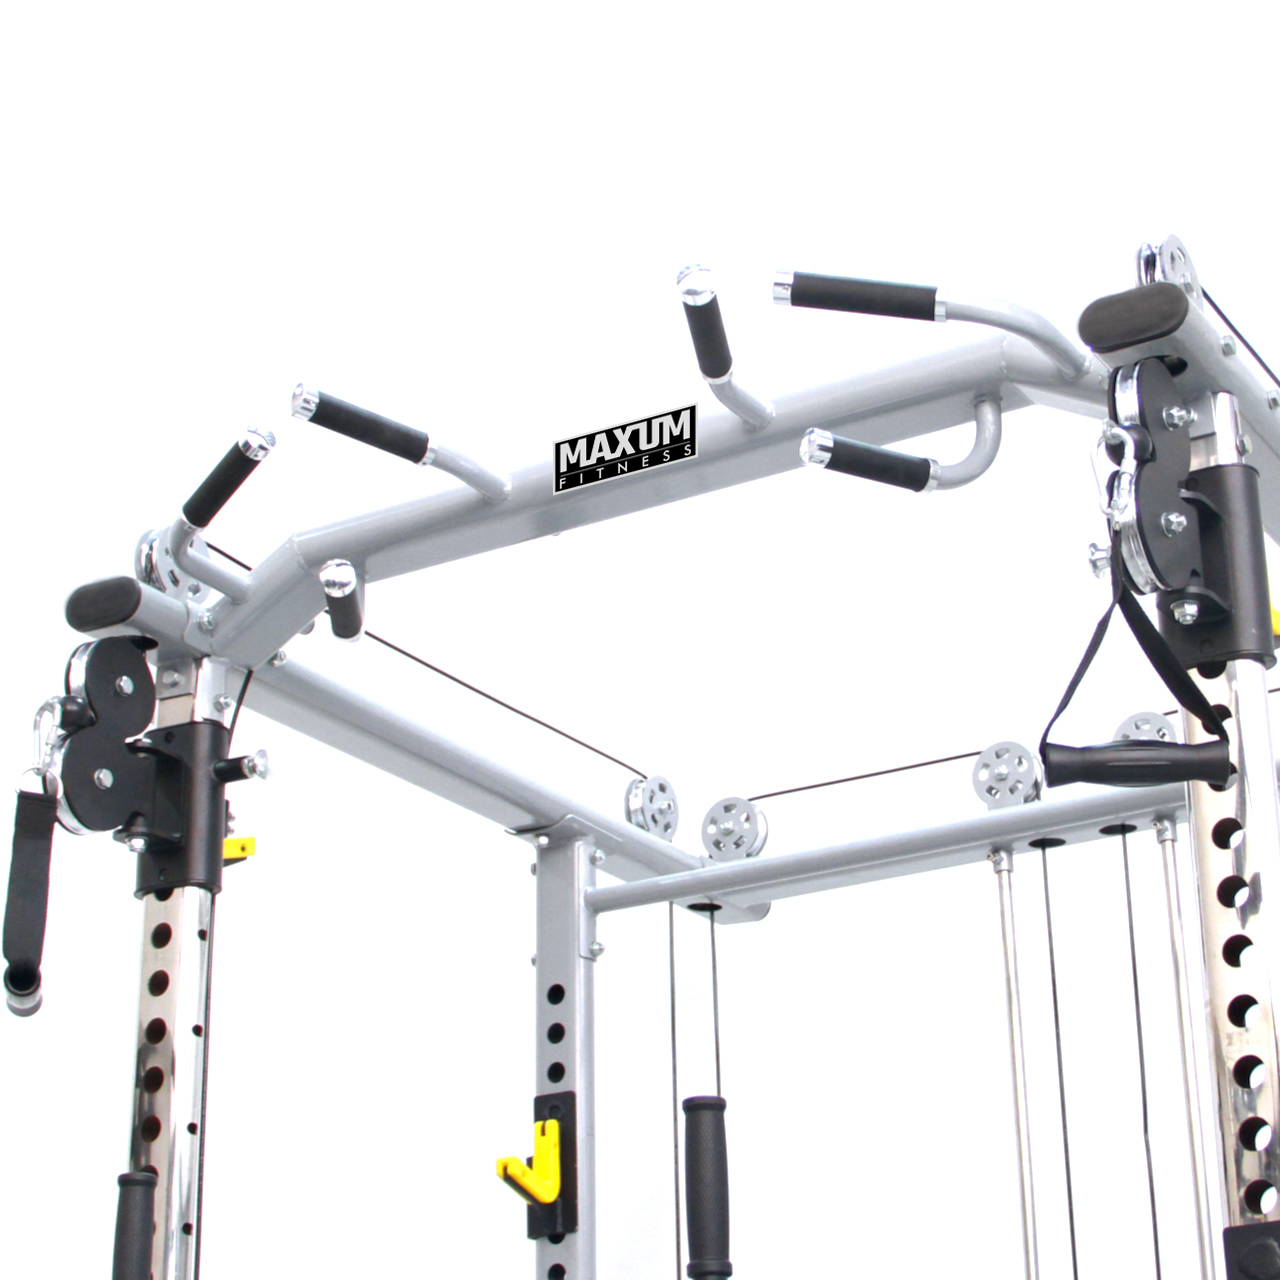 F-100 Functional Trainer Power Rack Home Gym